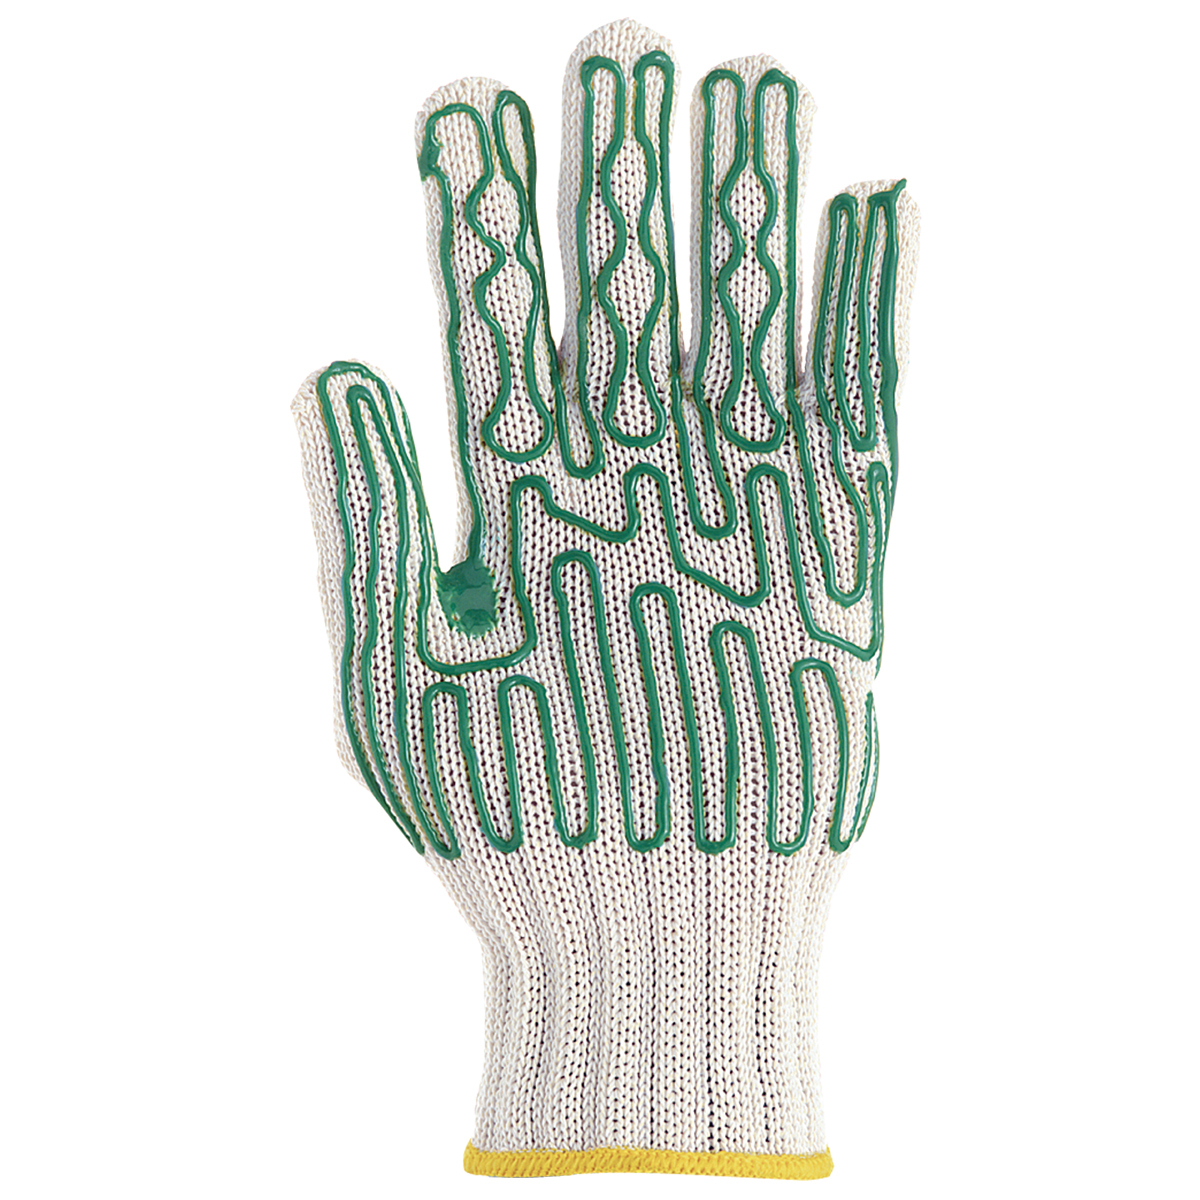 Wells Lamont Small Whizard®/Slipguard® 5.5 Gauge Fiber And Stainless Steel Cut Resistant Gloves With Polyurethane Coated Palm An